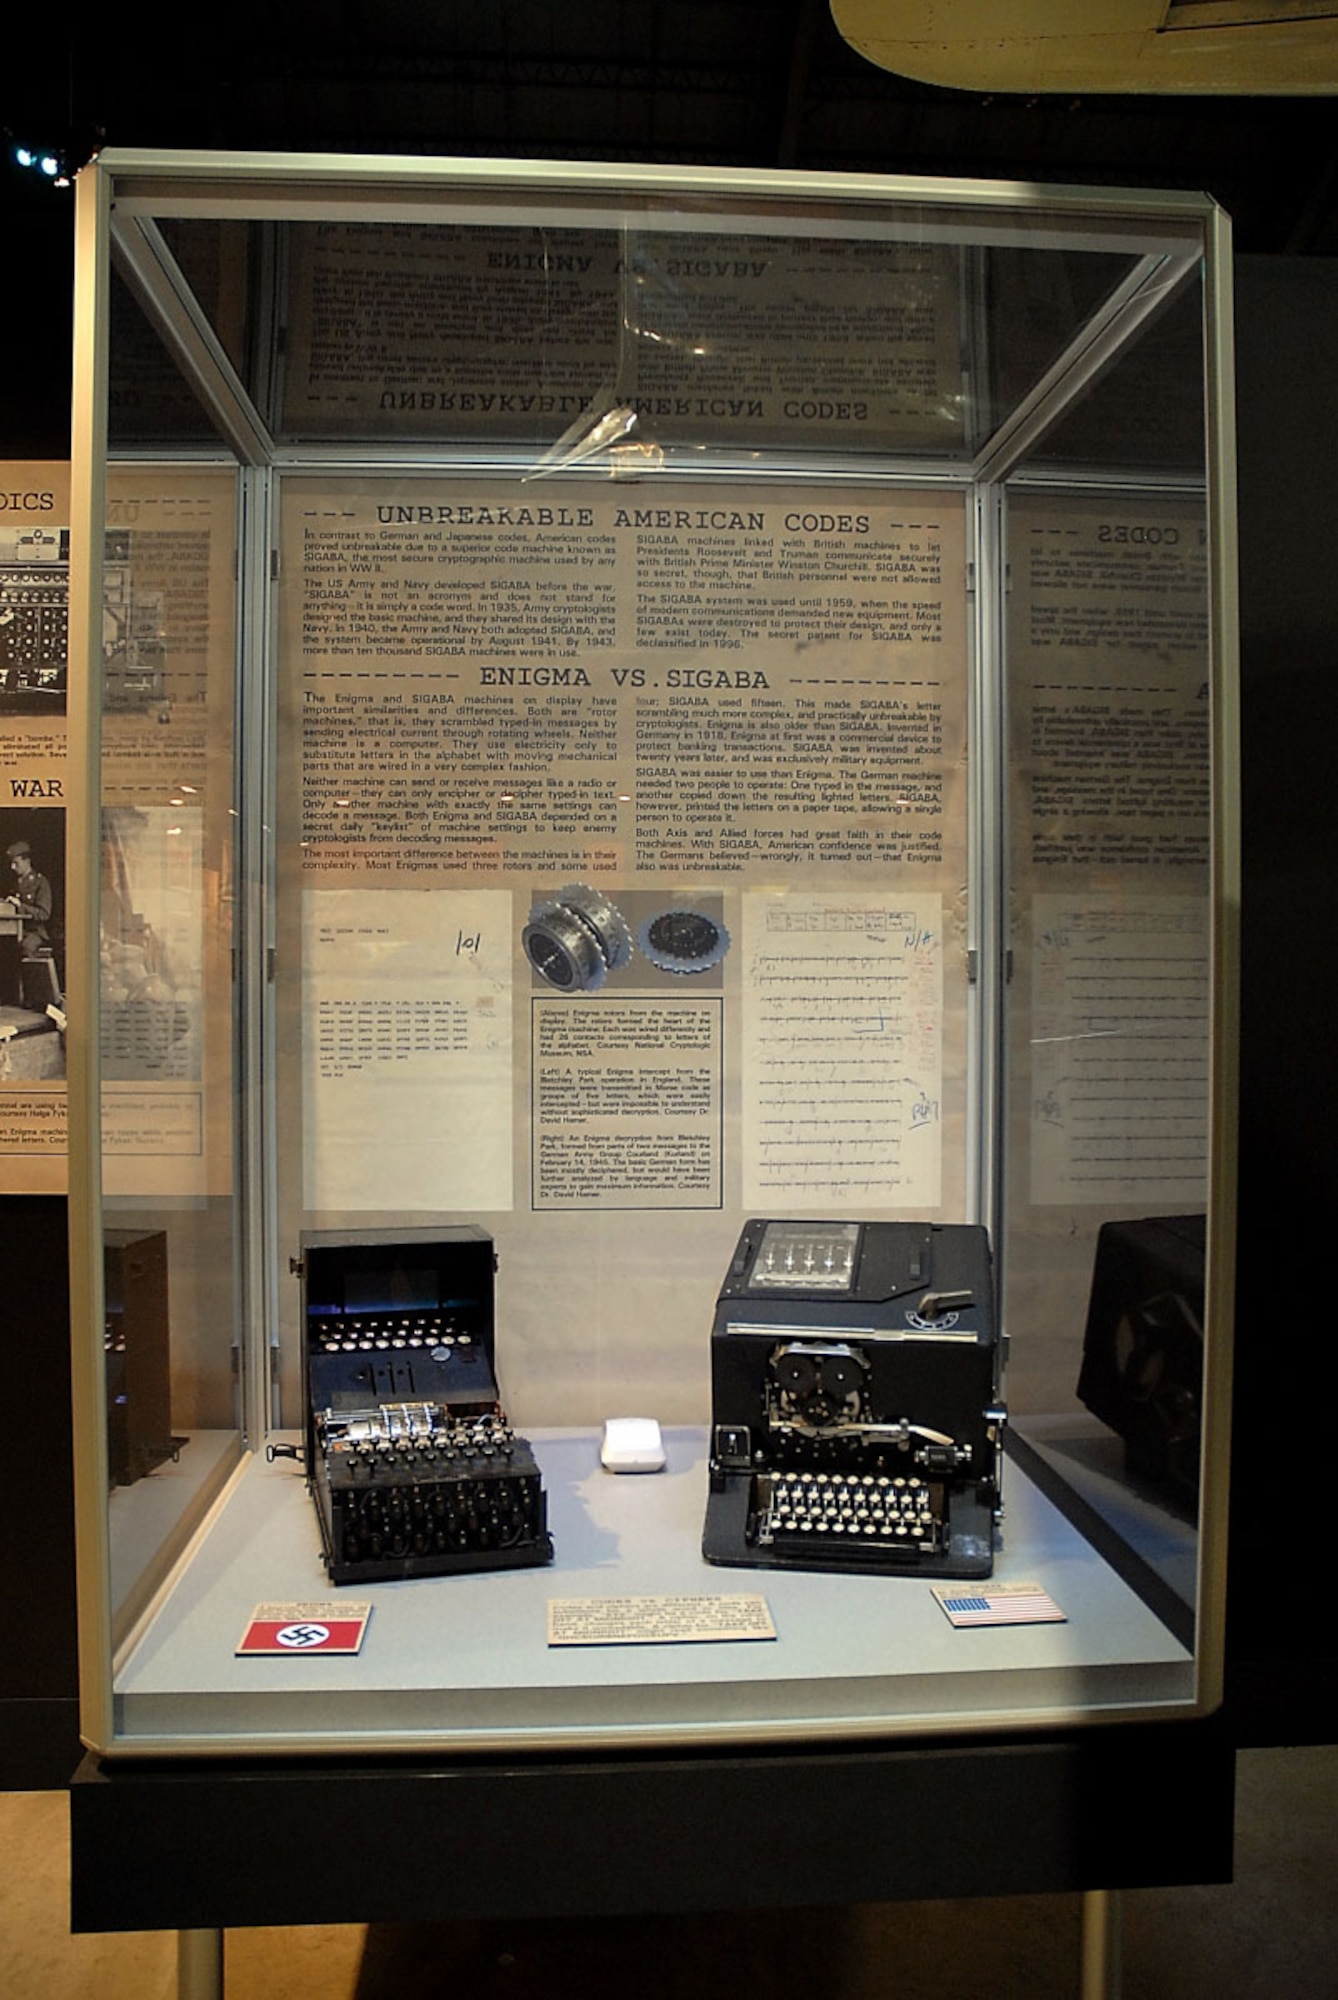 DAYTON, Ohio -- Cryptology exhibit on display in the World War II Gallery at the National Museum of the United States Air Force. (U.S. Air Force photo)